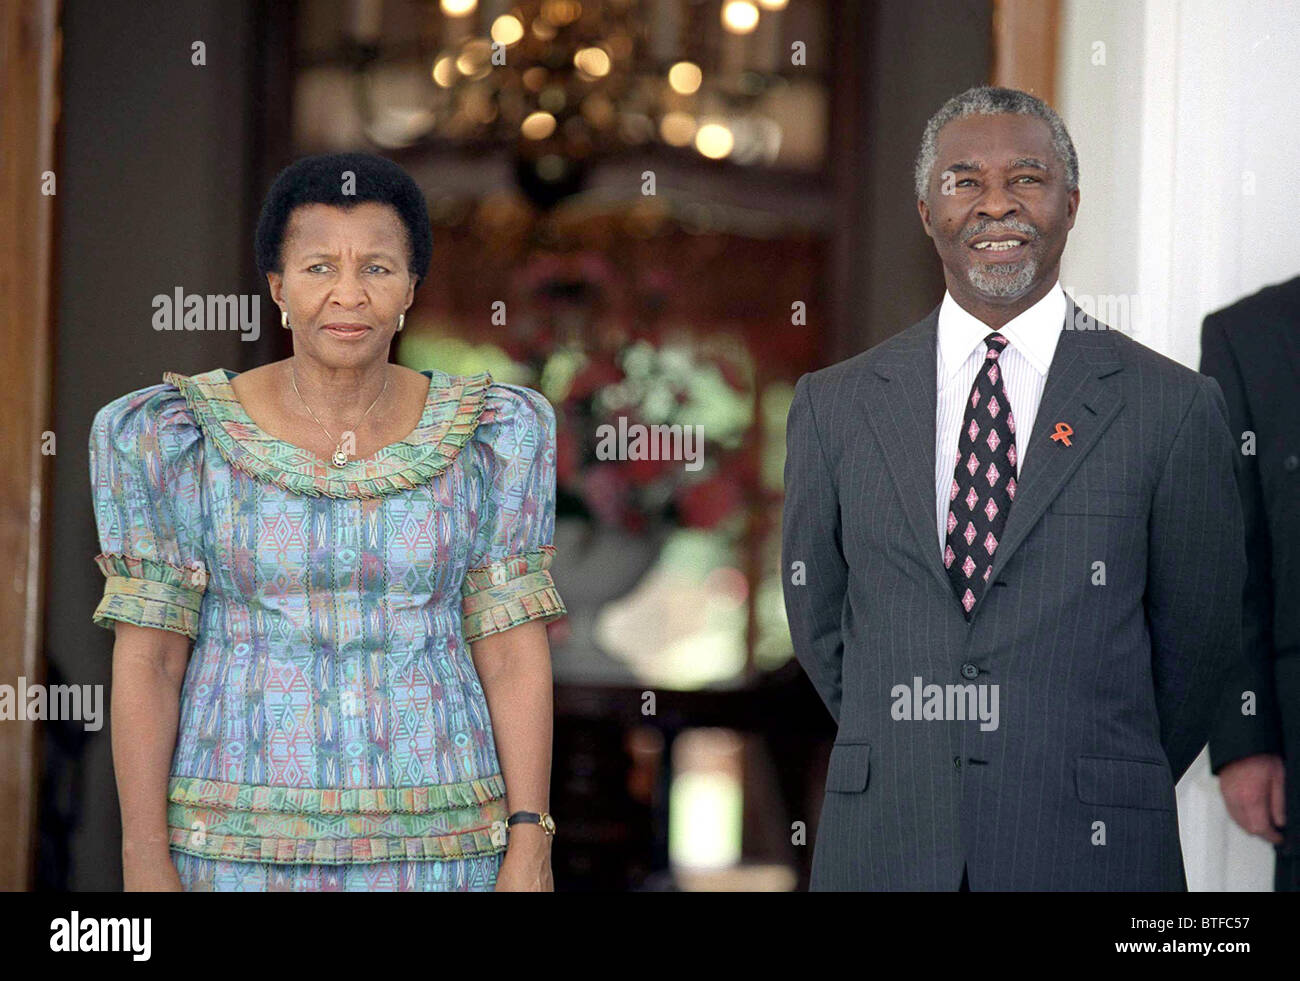 PRESIDENT THABO MBEKI AND HIS WIFE AT UNION BUILDINGS, PRETORIA, SOUTH AFRICA Stock Photo